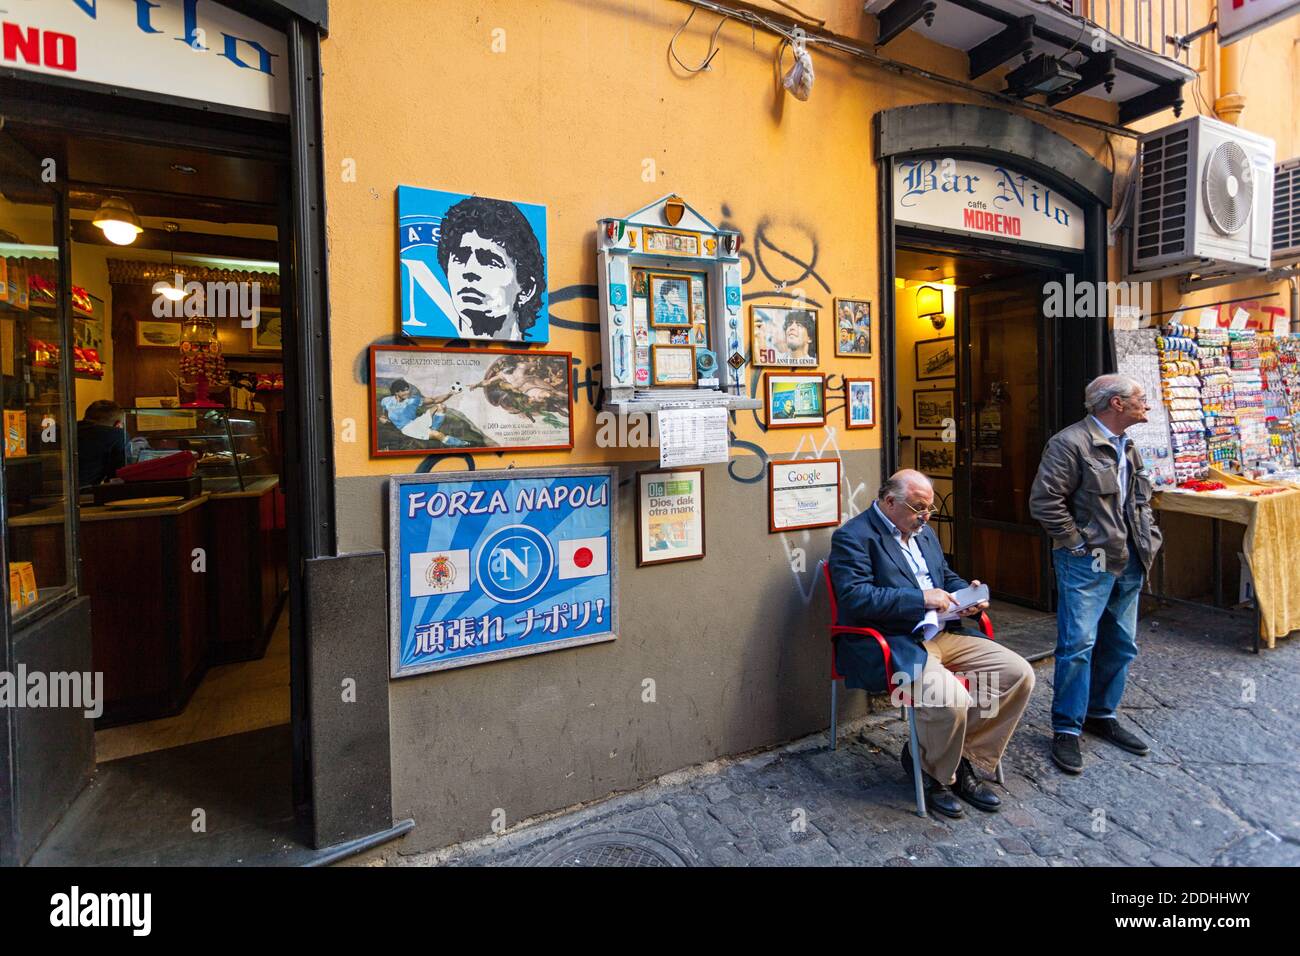 Naples, Italy - October 10, 2013: Altar of Maradona outside the bar Nilo, He brought the top of European football the Napoli winning two league titles Stock Photo